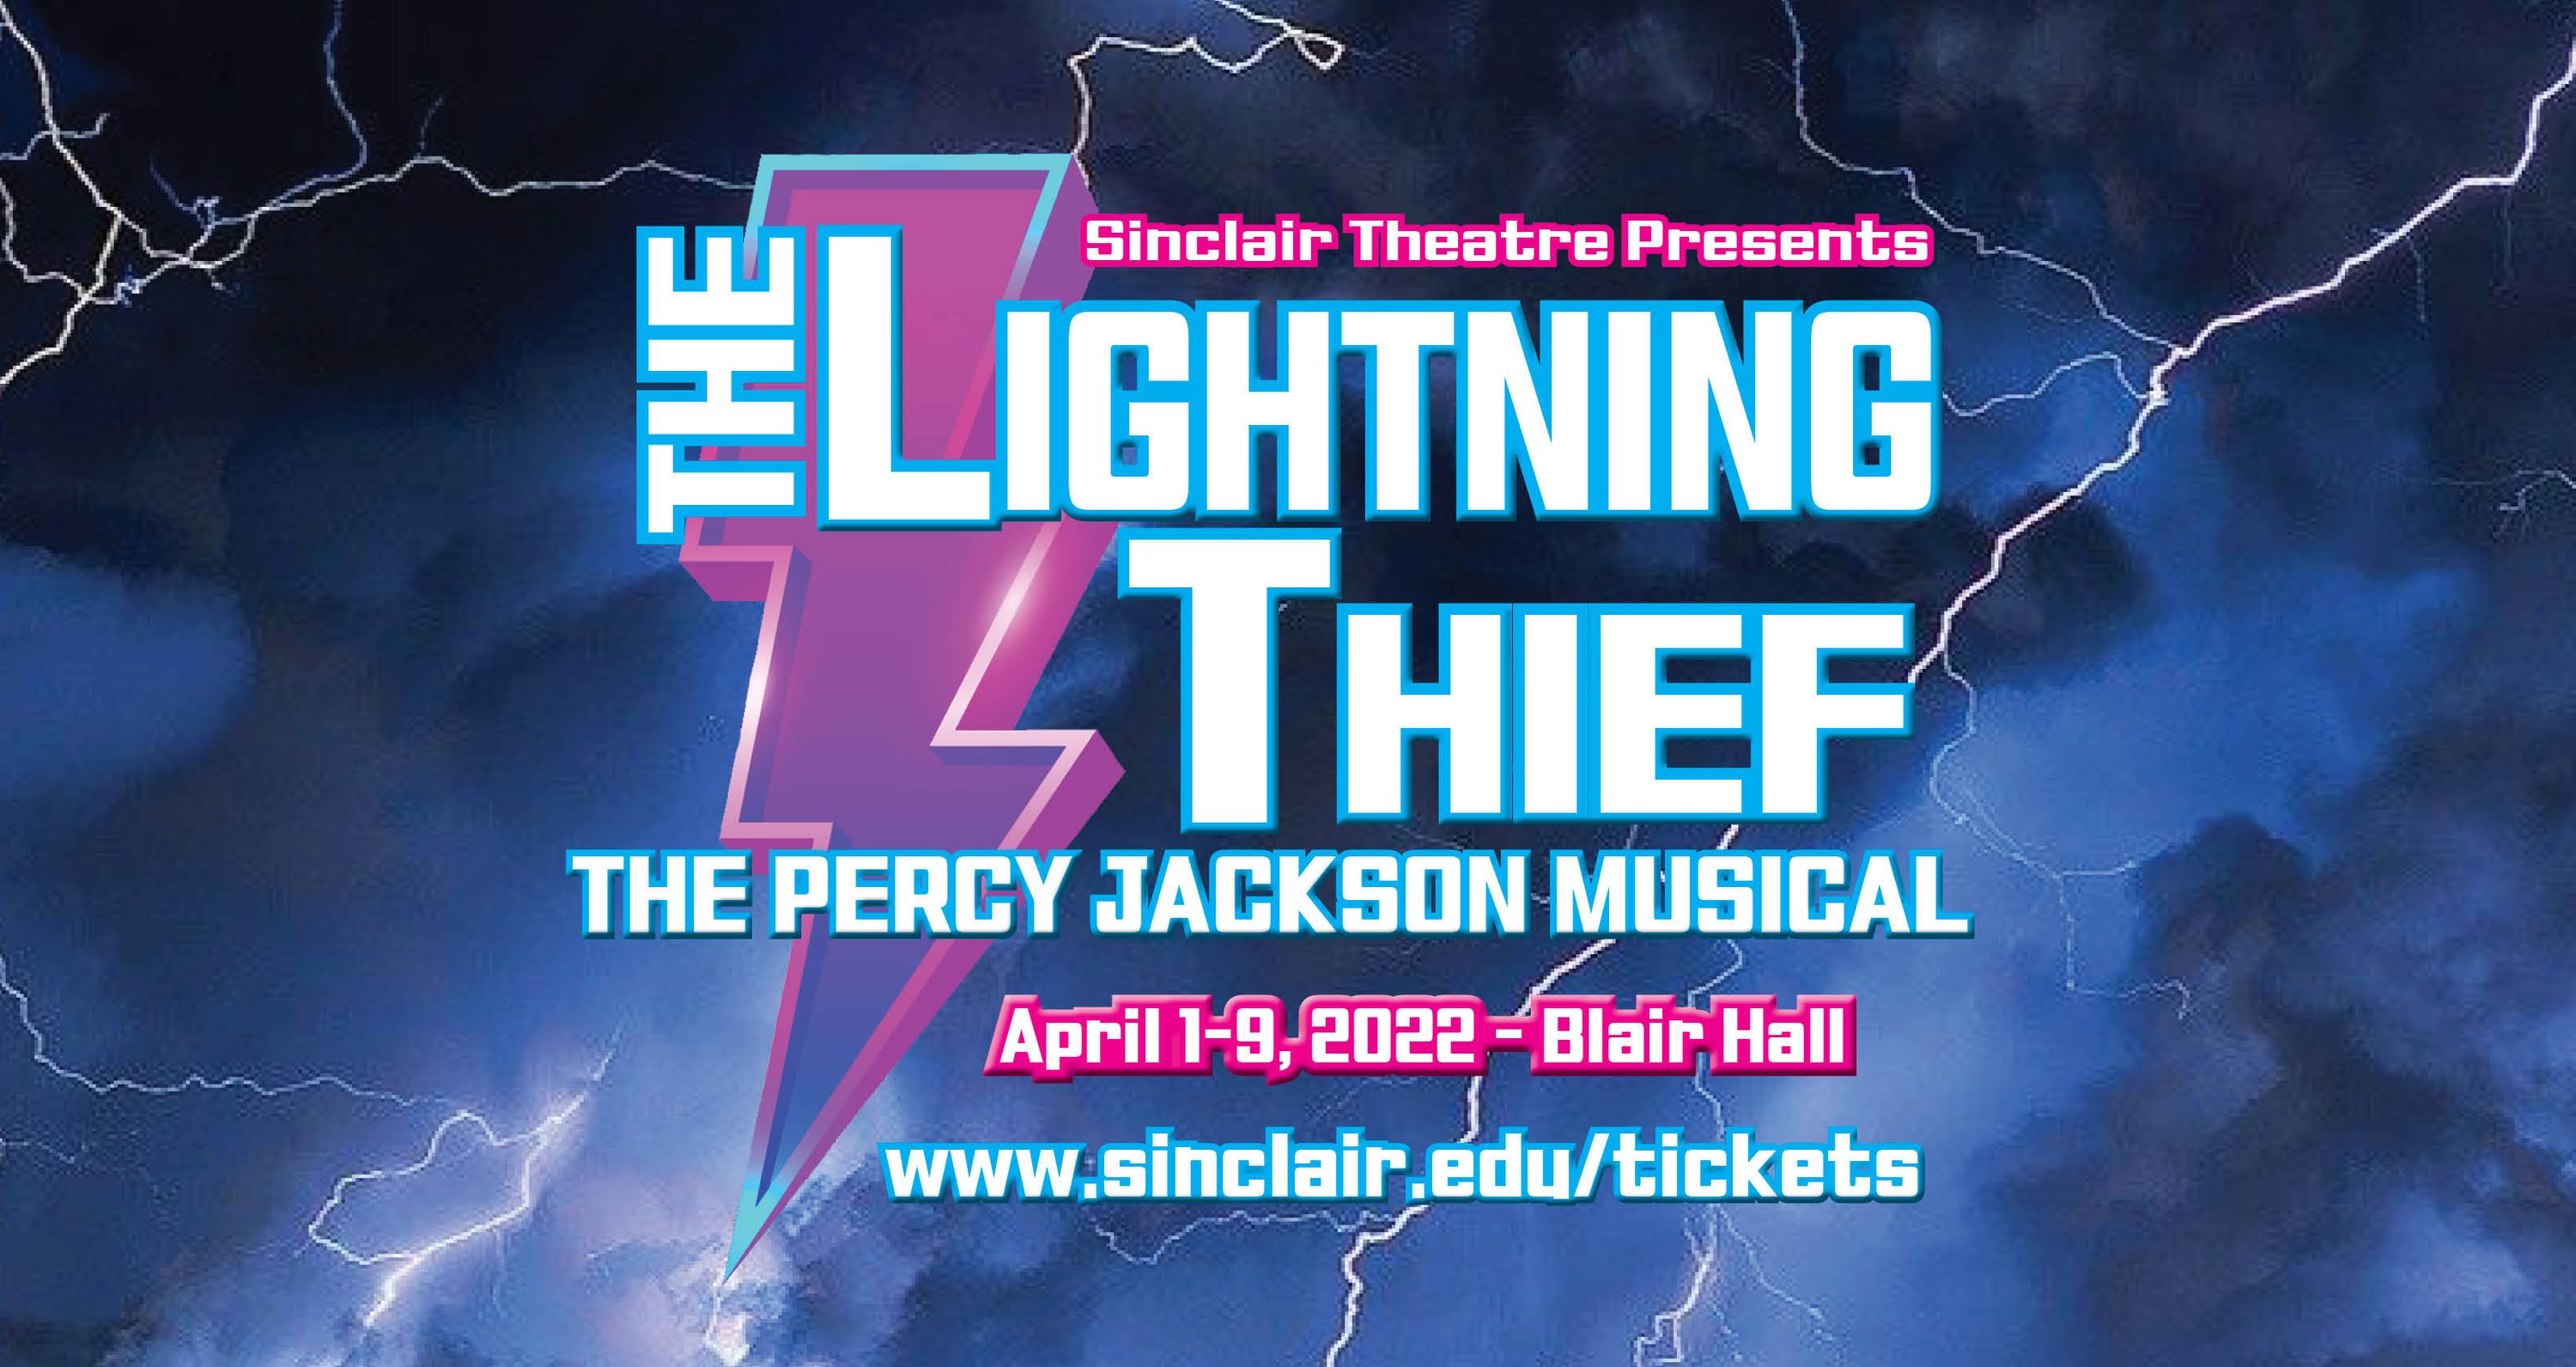 Poster: Sinclair Theatre Presents 'The Lightning Thief' - The Percy Jackson Musical - April 1-9, 2022-Blair Hall